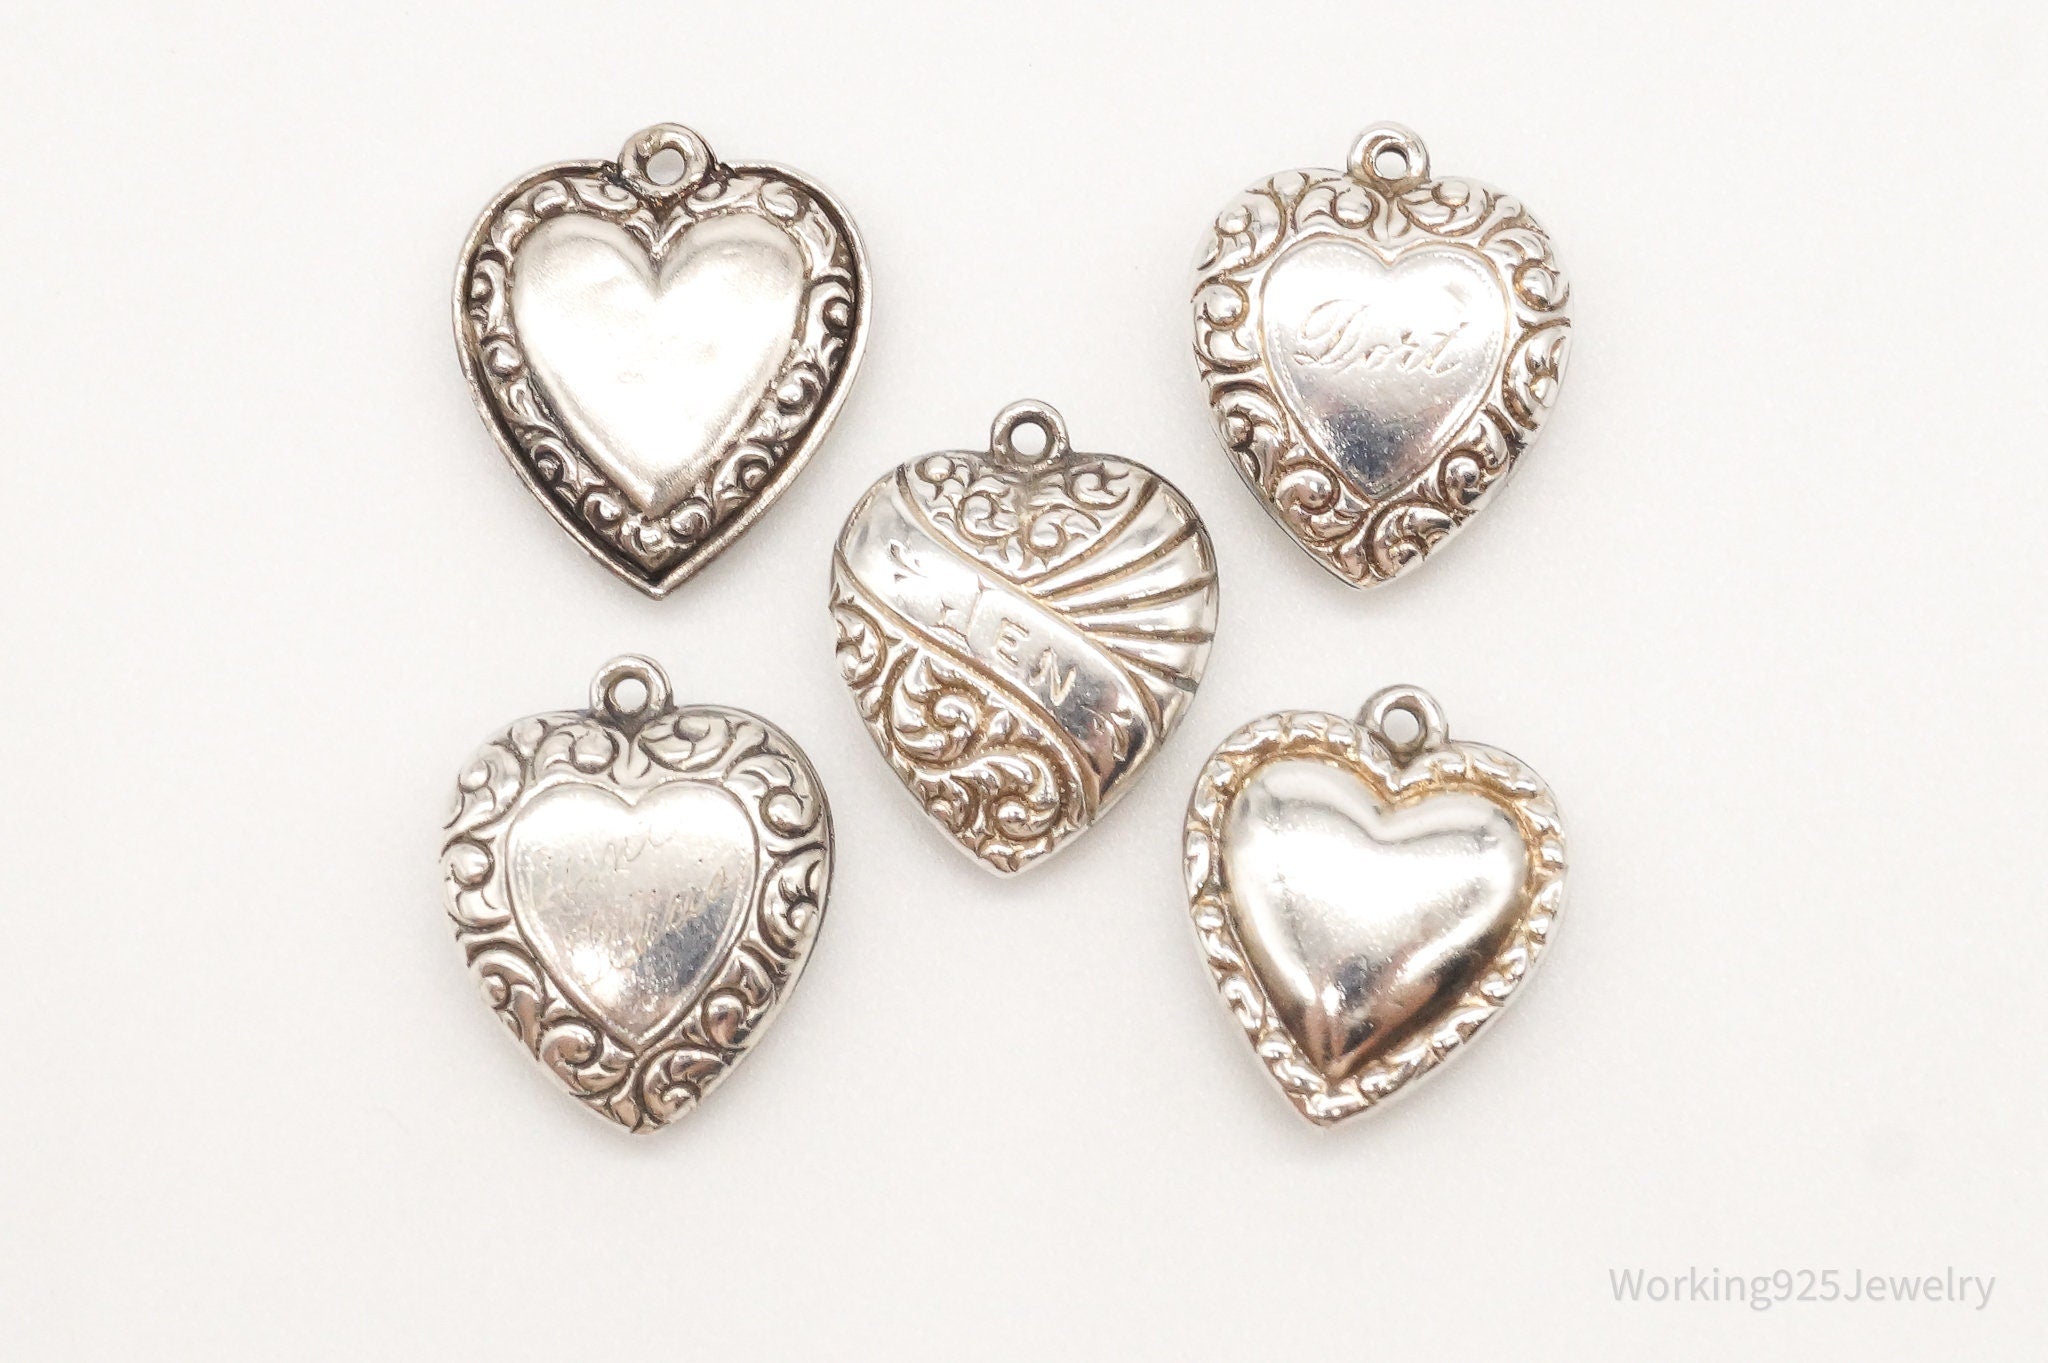 Vintage Puffy Hearts Sterling Silver Charms Lot